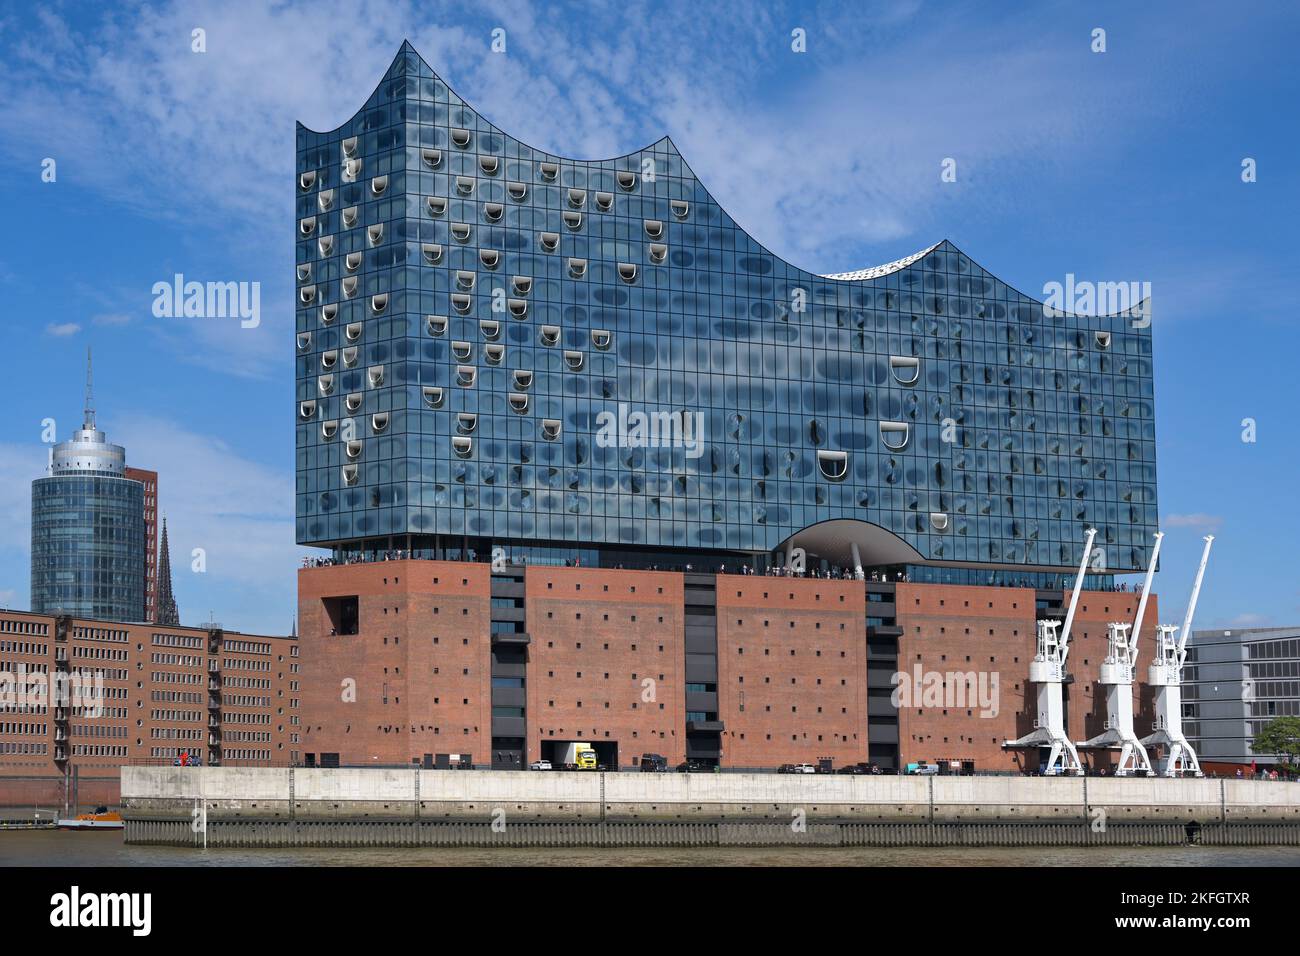 Elbphilharmonie, Hamburg concert hall, modern architecture with glass and traditional red brick in the warehouse city, famous landmark and tourist des Stock Photo